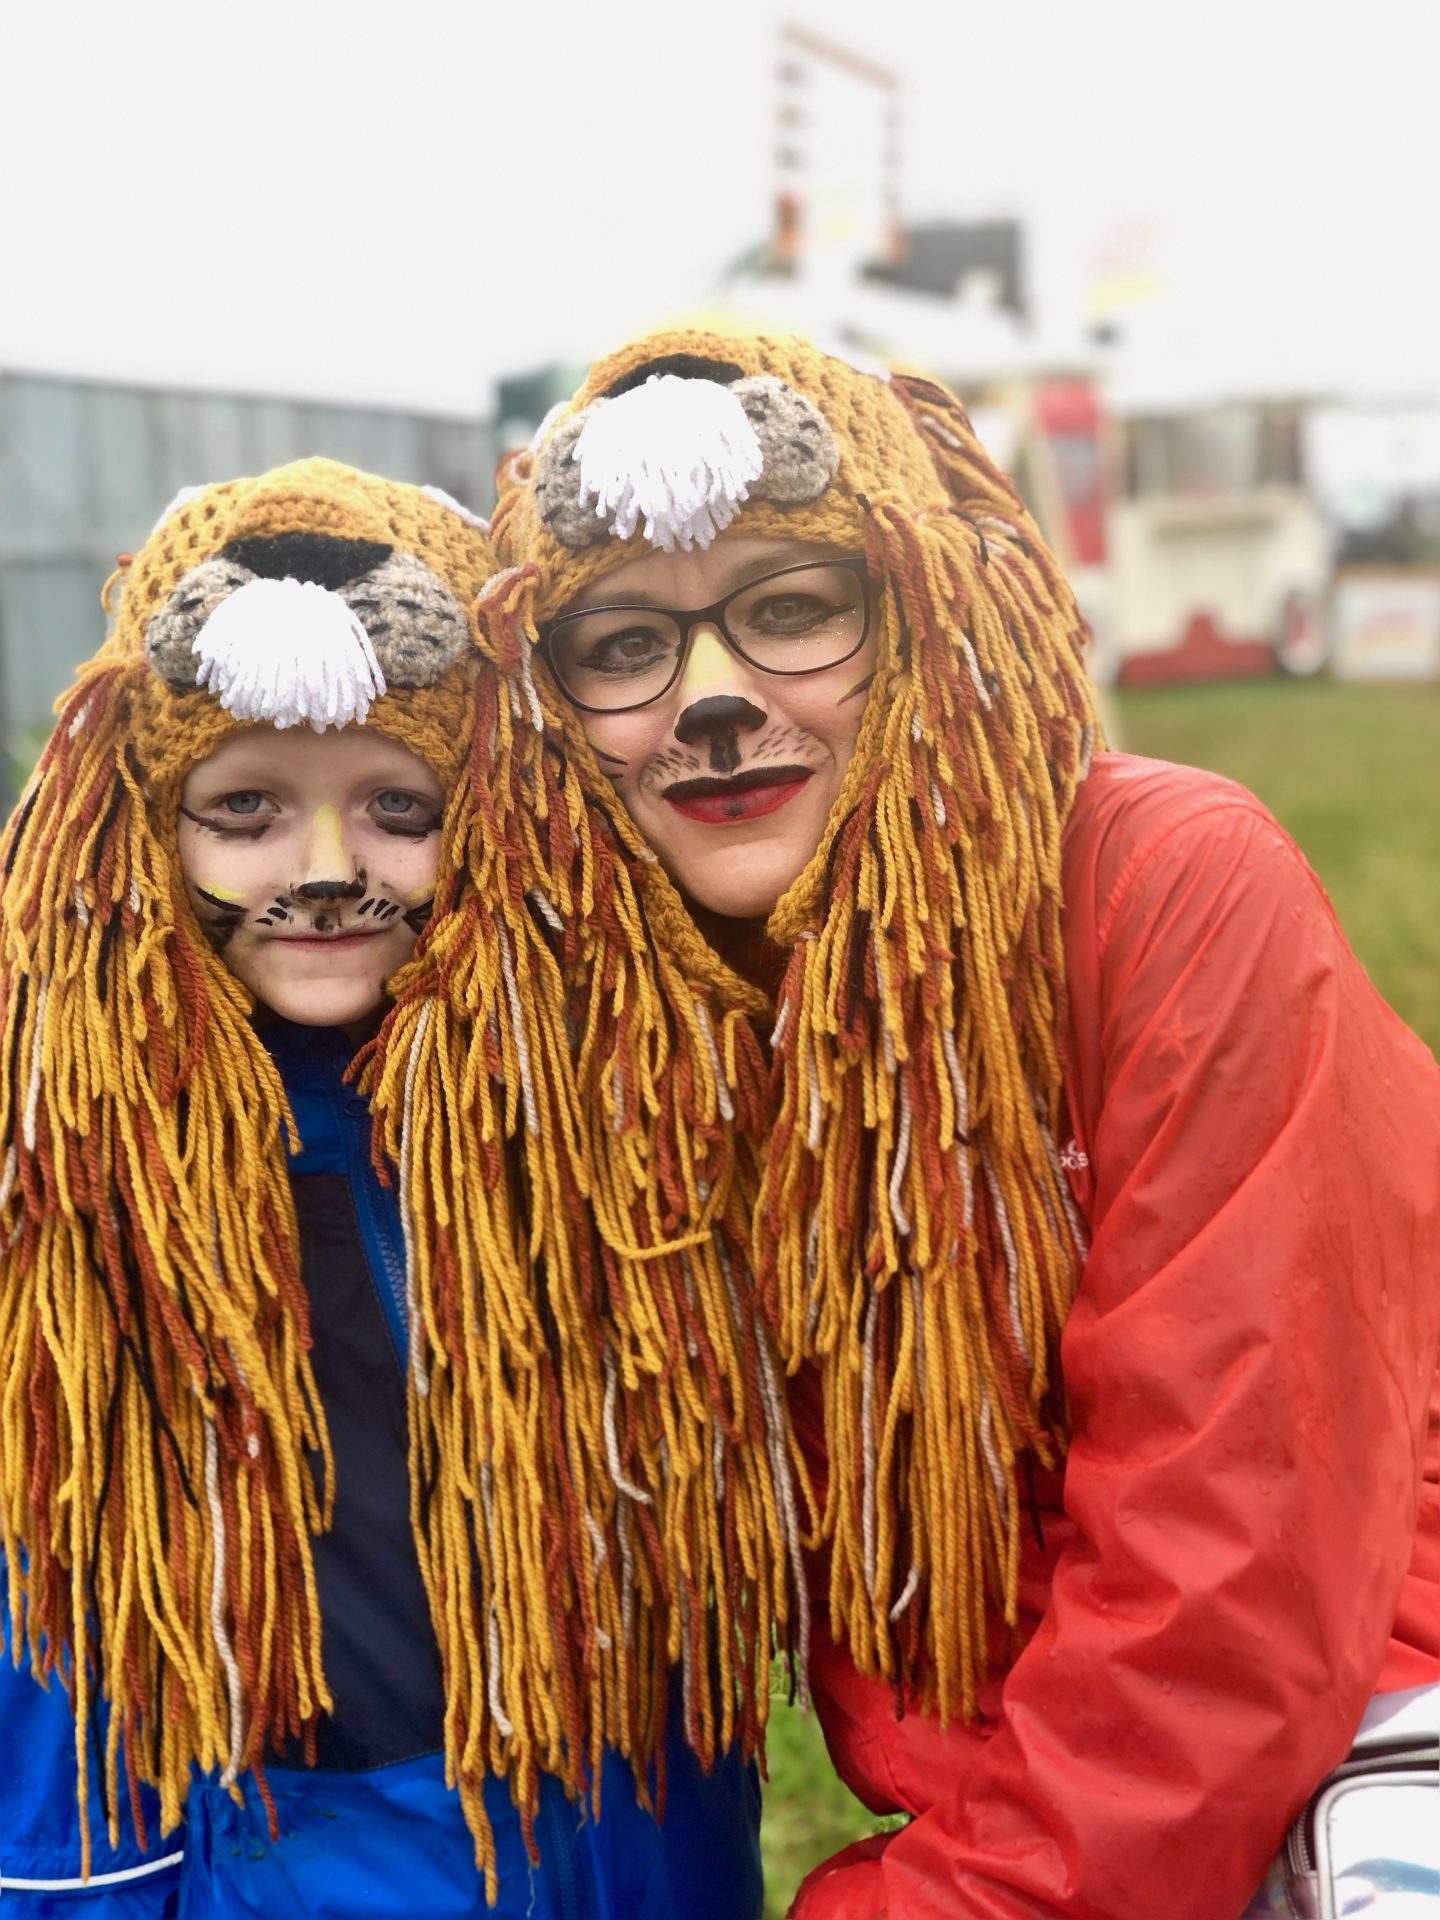 Y Not festival family review 2019